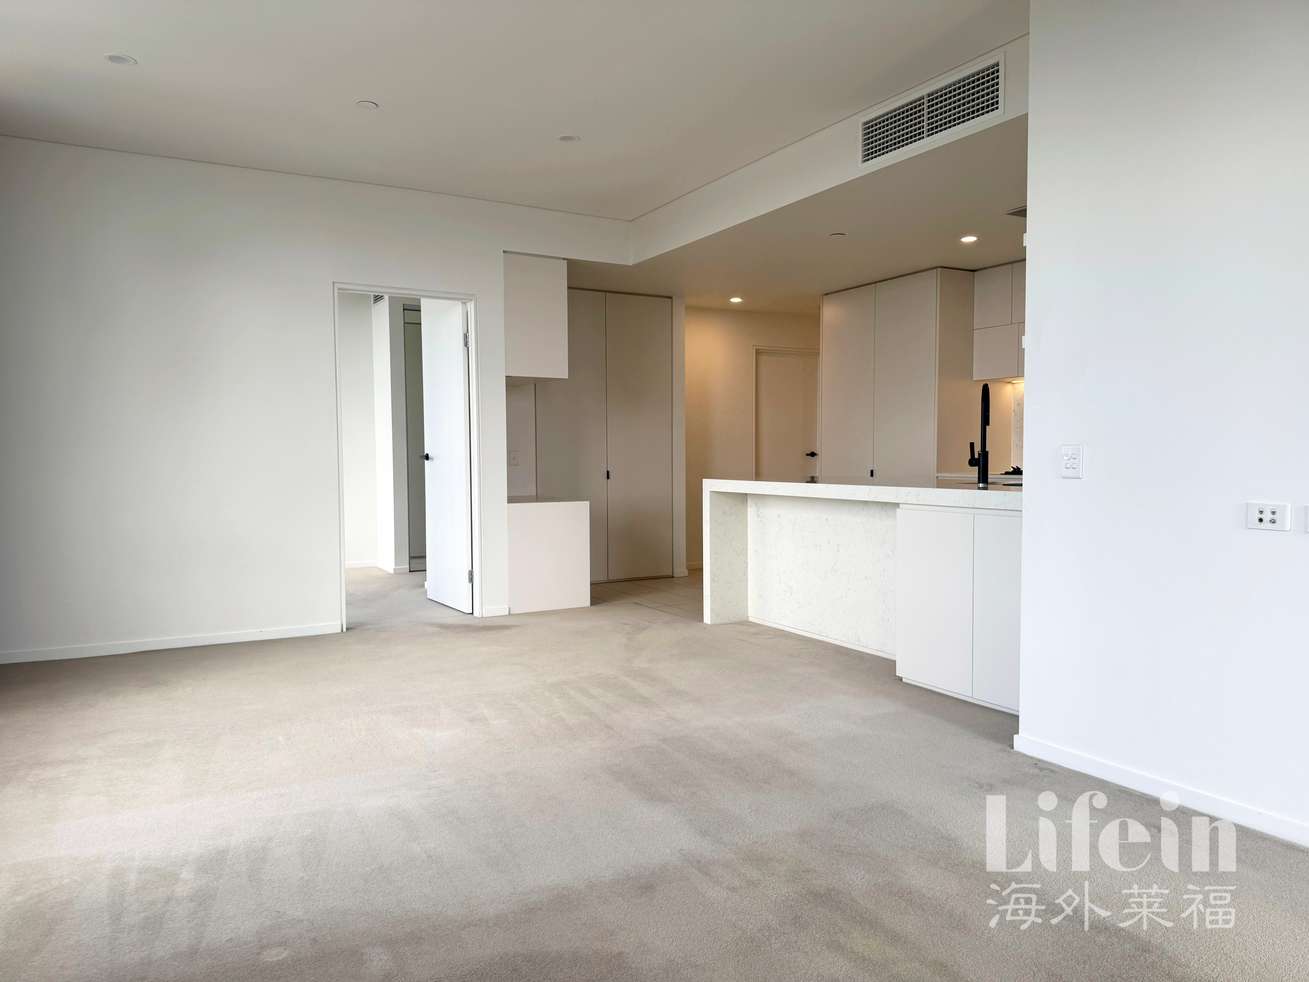 Main view of Homely apartment listing, 1304/62 Logan Road, Woolloongabba QLD 4102